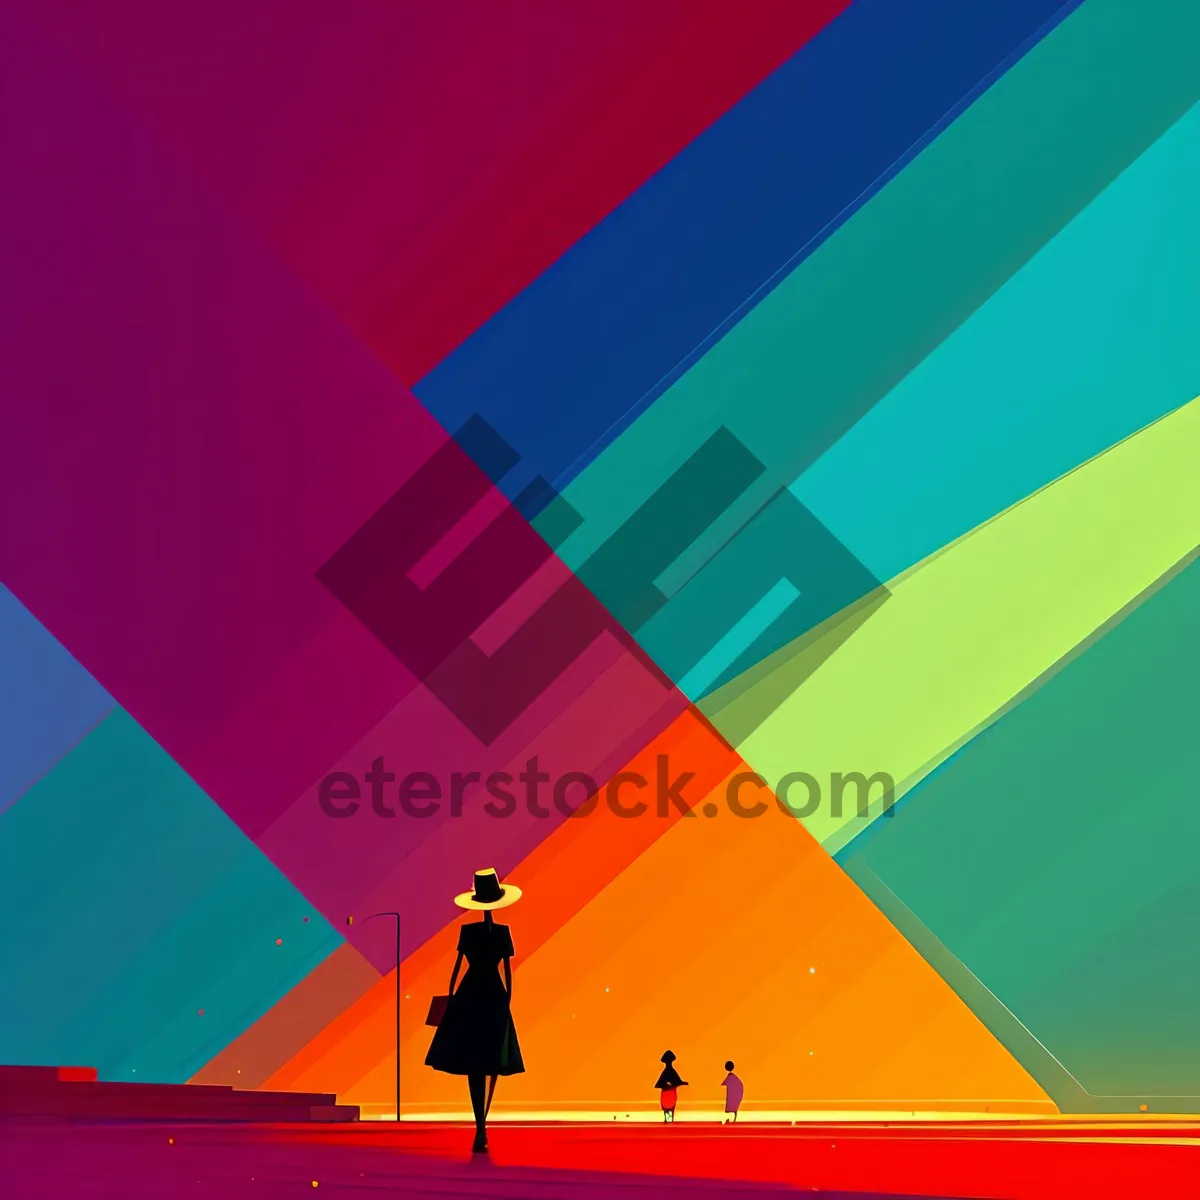 Picture of Colorful Graphic Design with Abstract Rainbow Curve